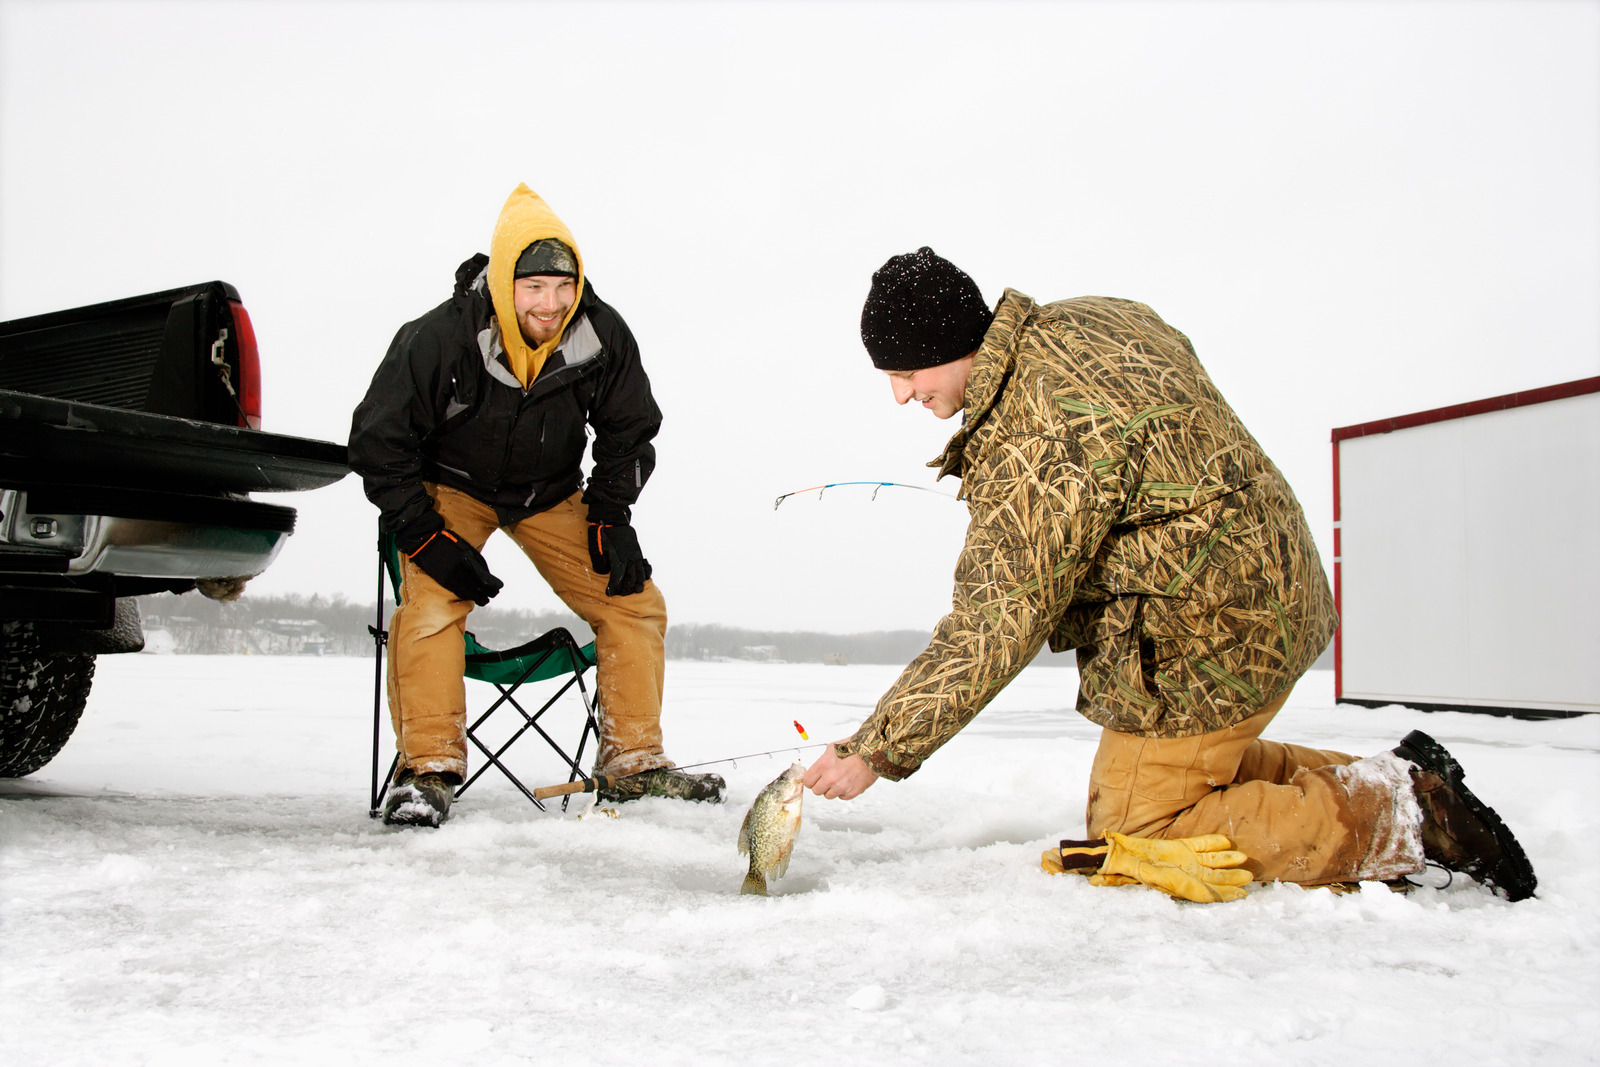 Two young men ice fishing in a winter environment. Horizontal shot.